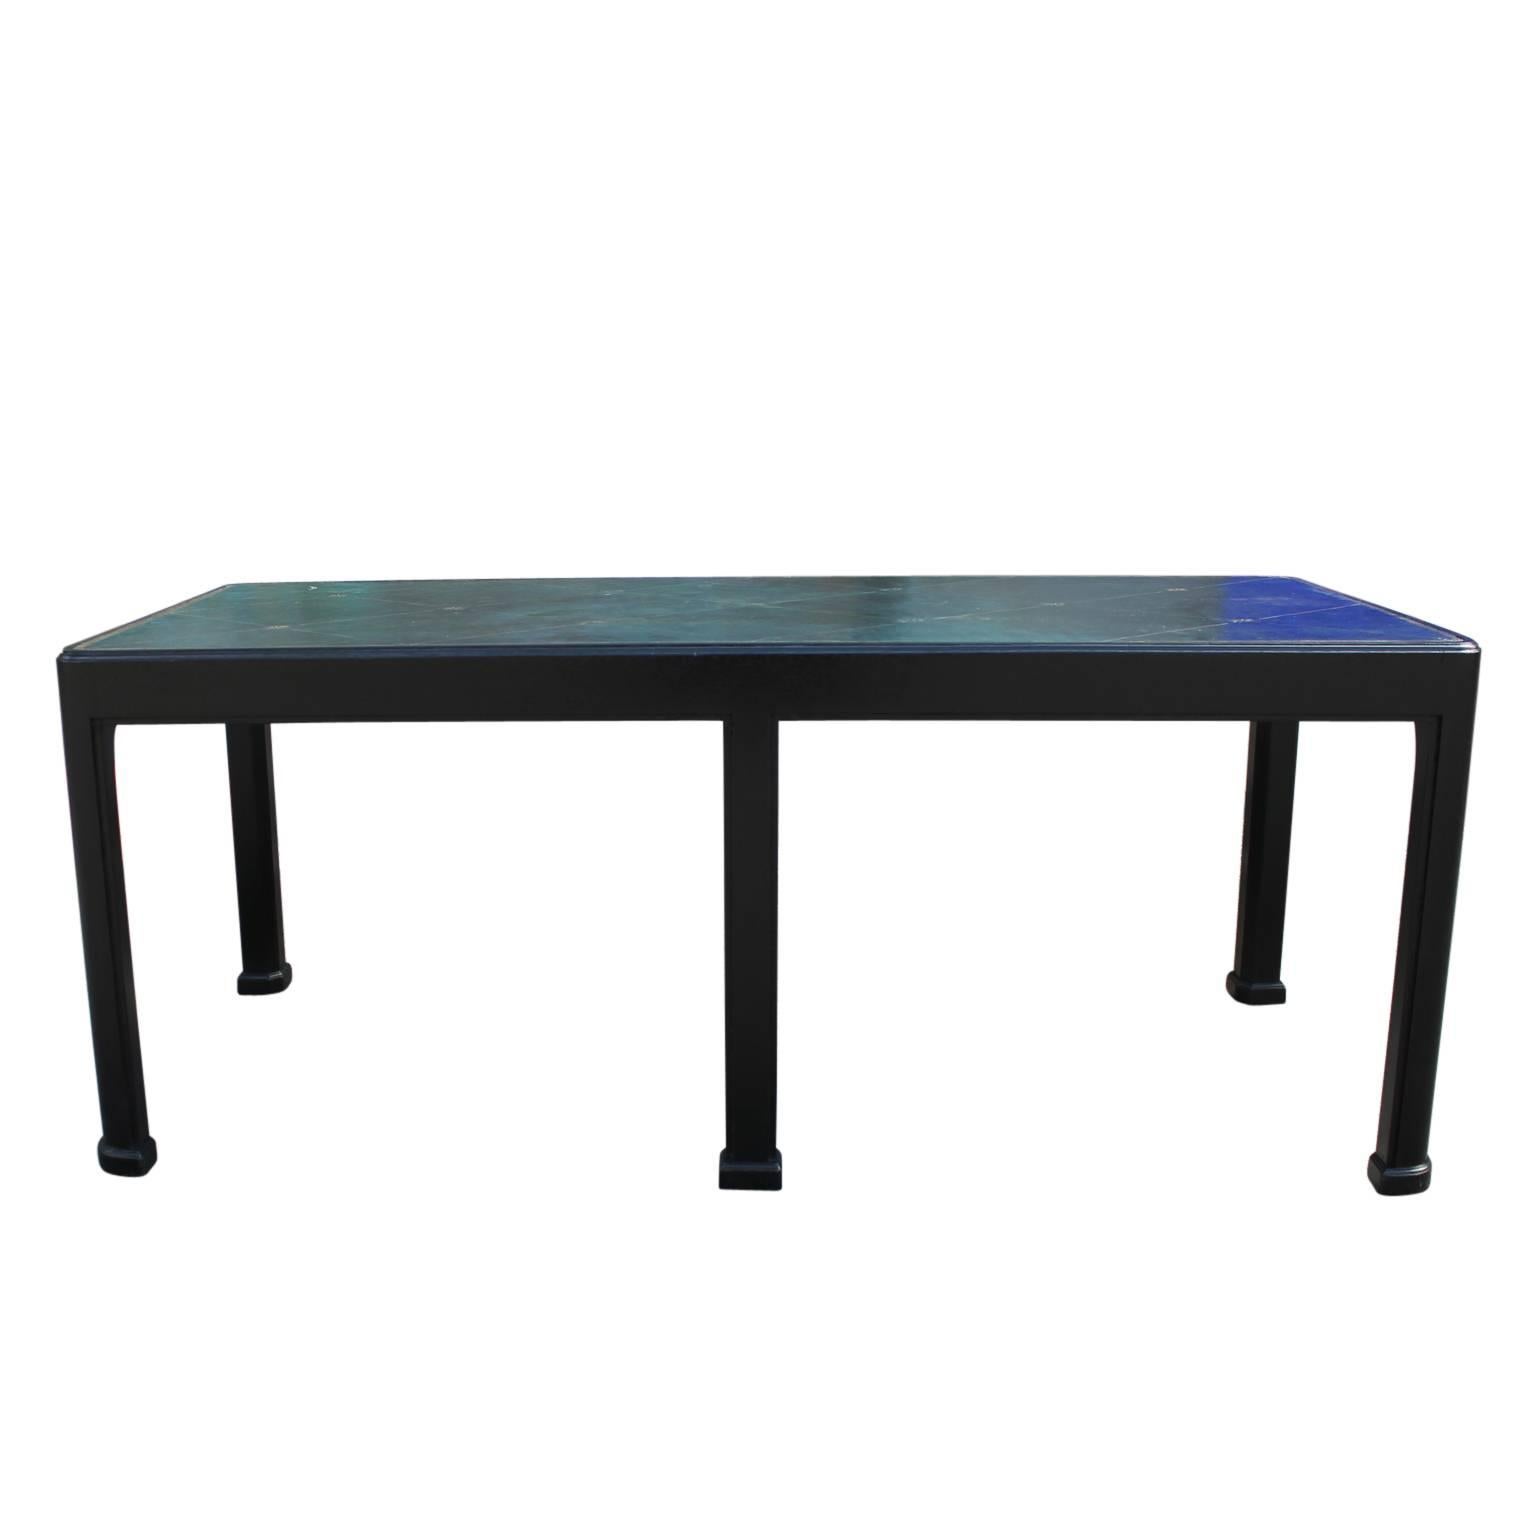 Great 1940s Tommi Parzinger or Grosfeld House style coffee table with an ebony base and distressed blue-green leather top. The base has been restored while the top retains it's perfect patina. 